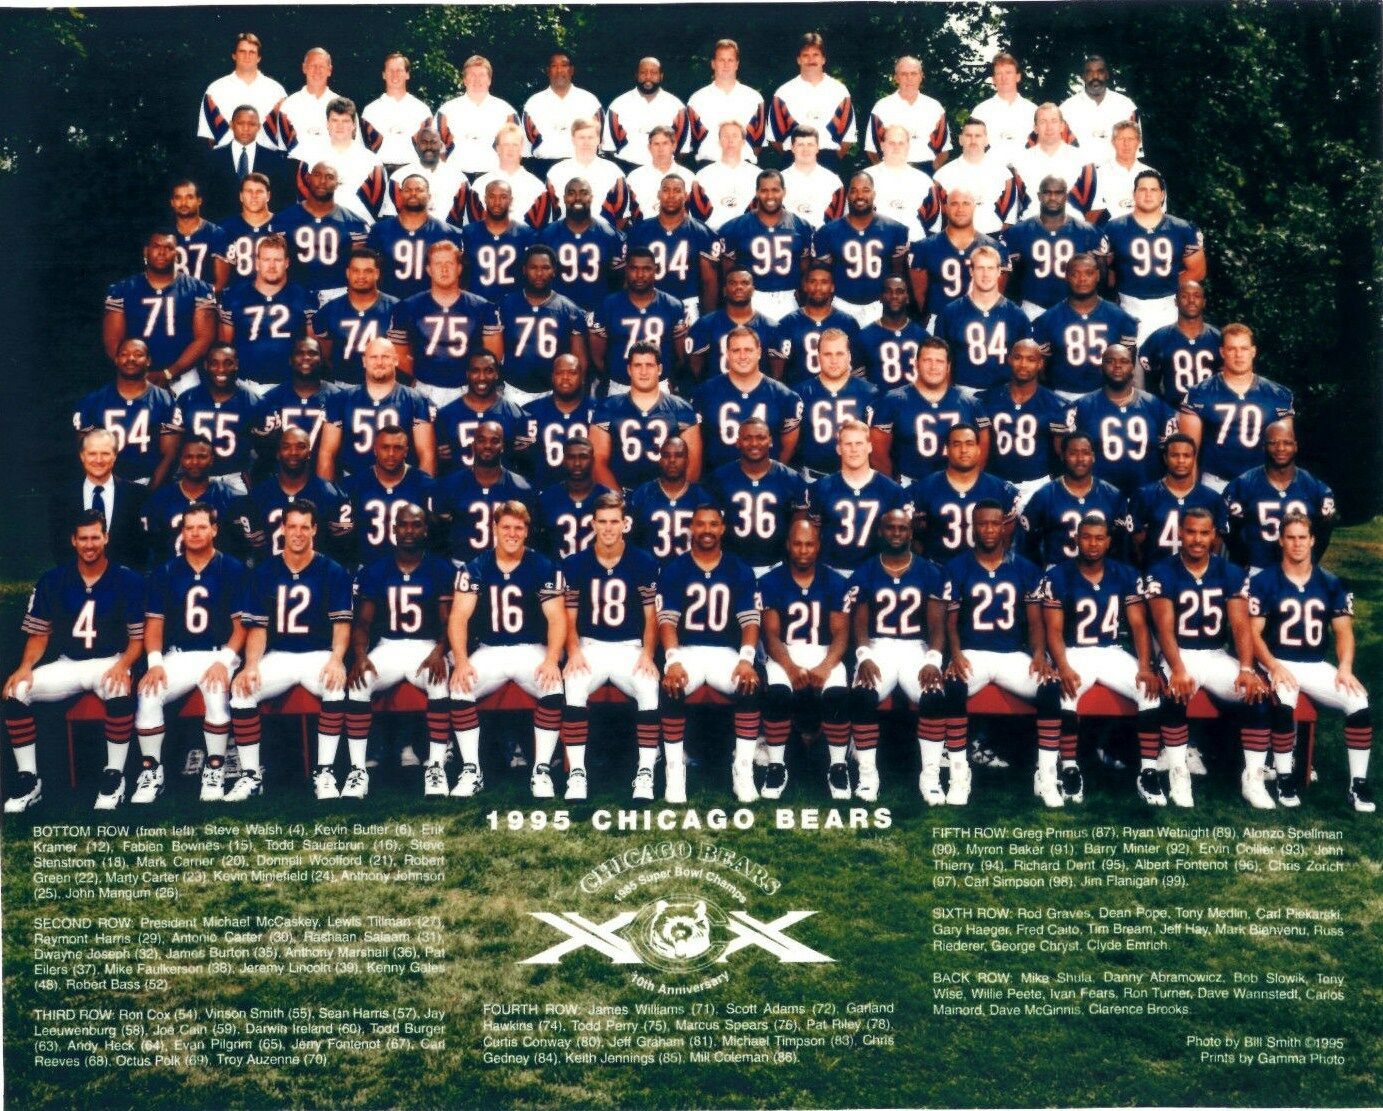 1995 CHICAGO BEARS 8X10 TEAM PHOTO FOOTBALL NFL PICTURE - $4.94